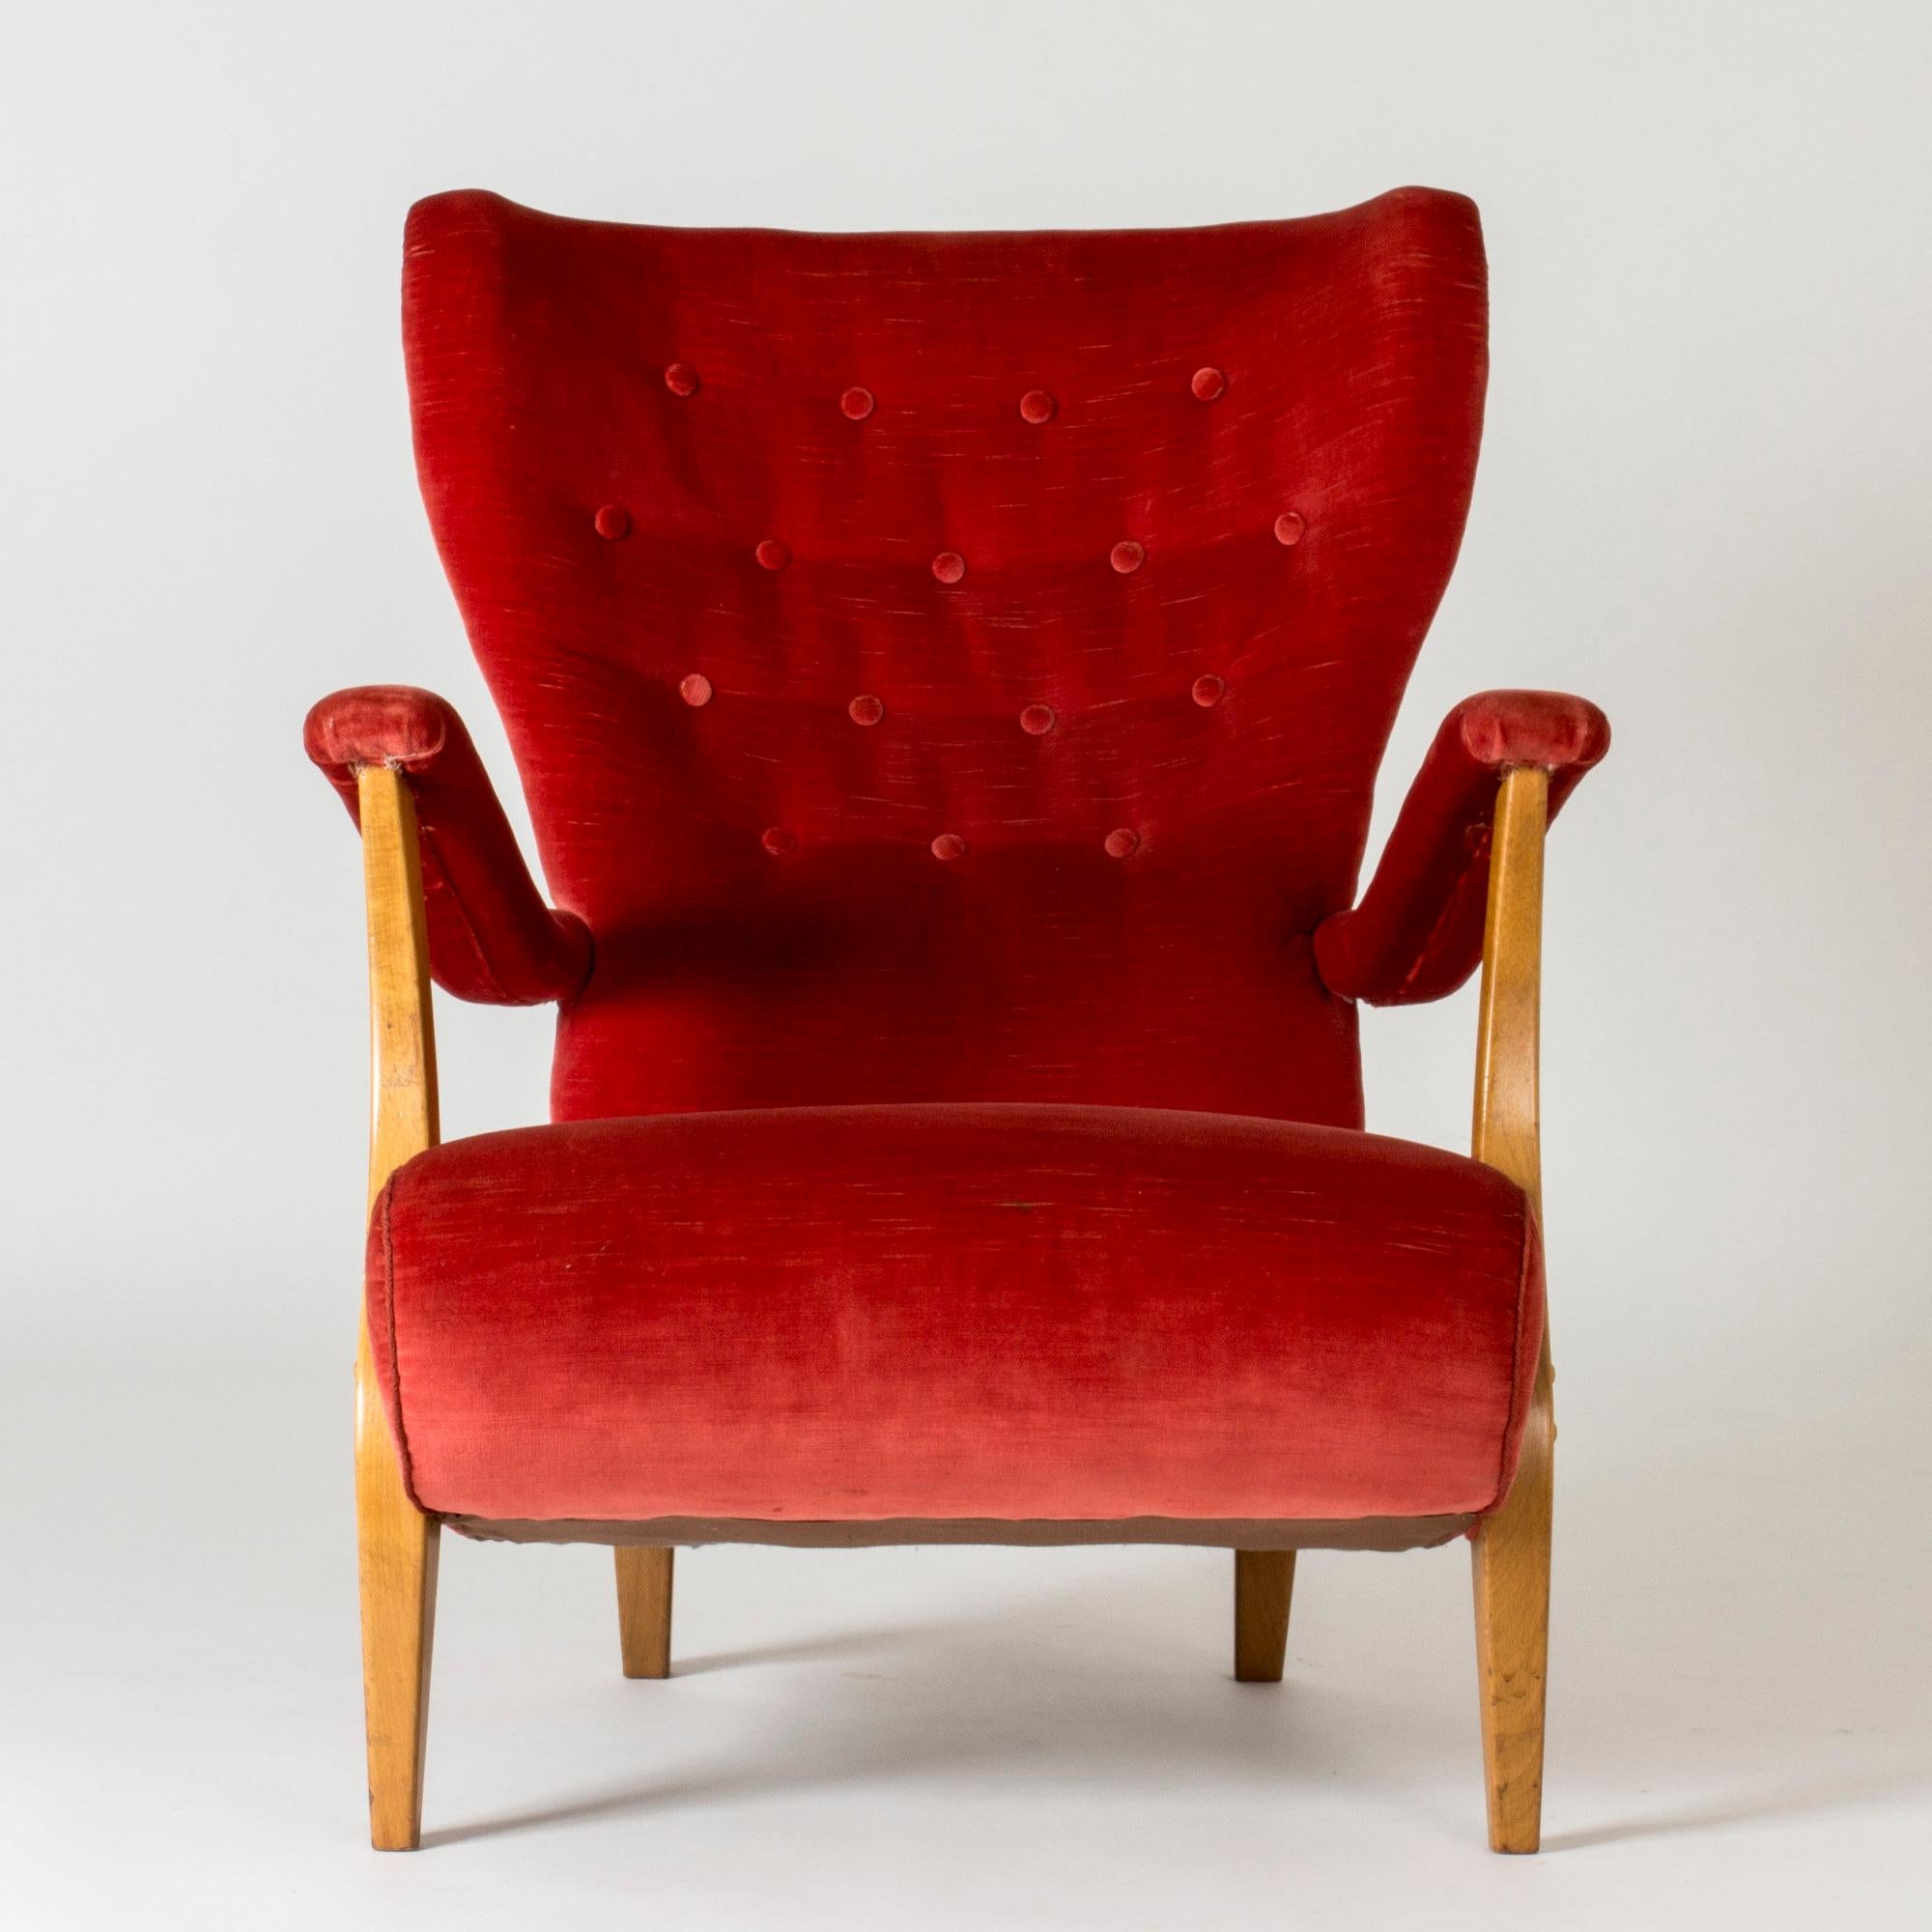 Beautiful Swedish Modern easy chair, with bold flowing lines. Original coral pink velvet upholstery.